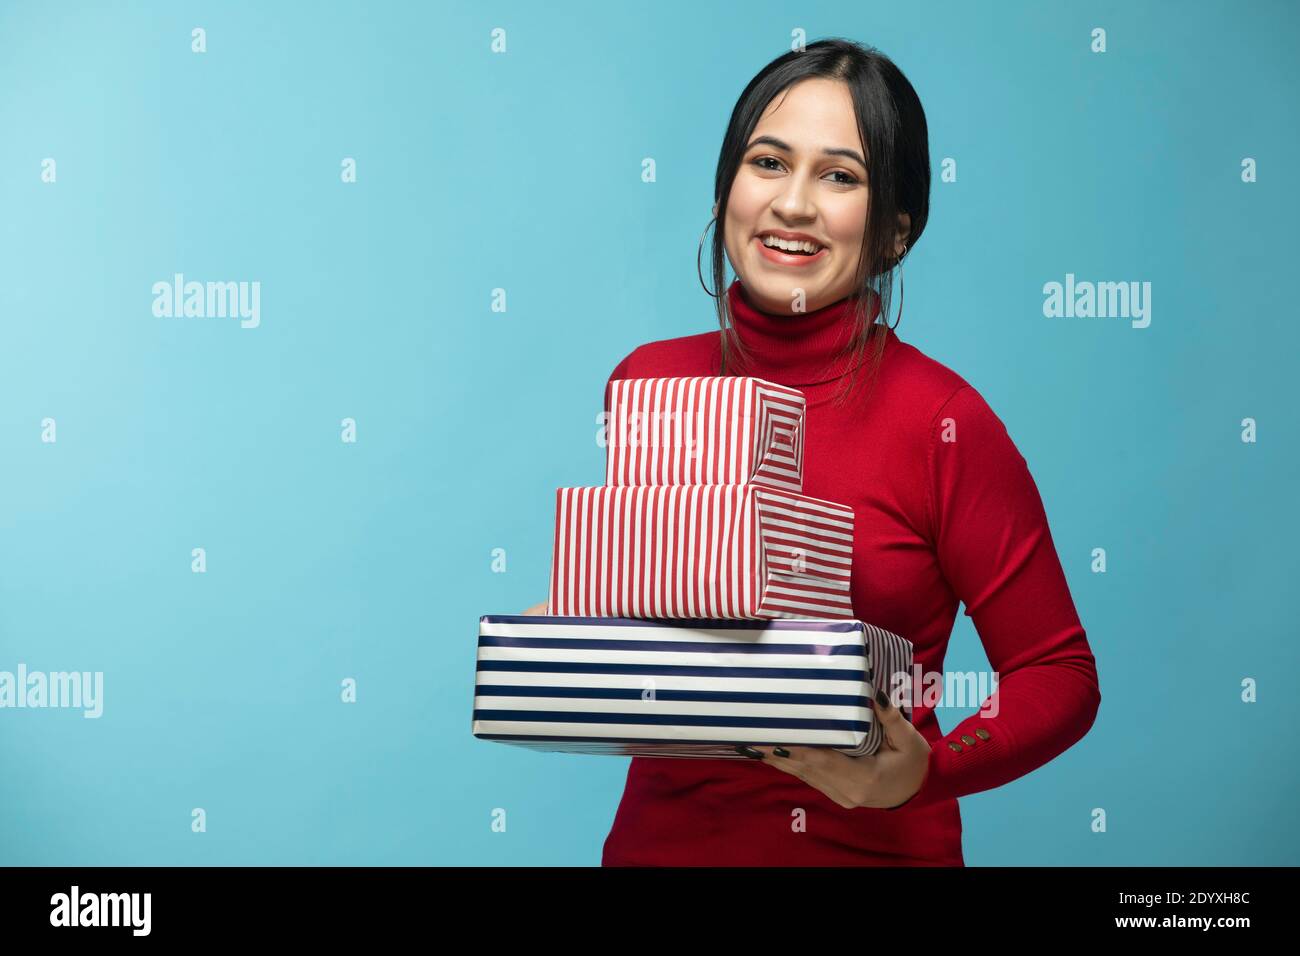 Portrait of young woman wearing red sweatshirt and holding gift box in hand Stock Photo